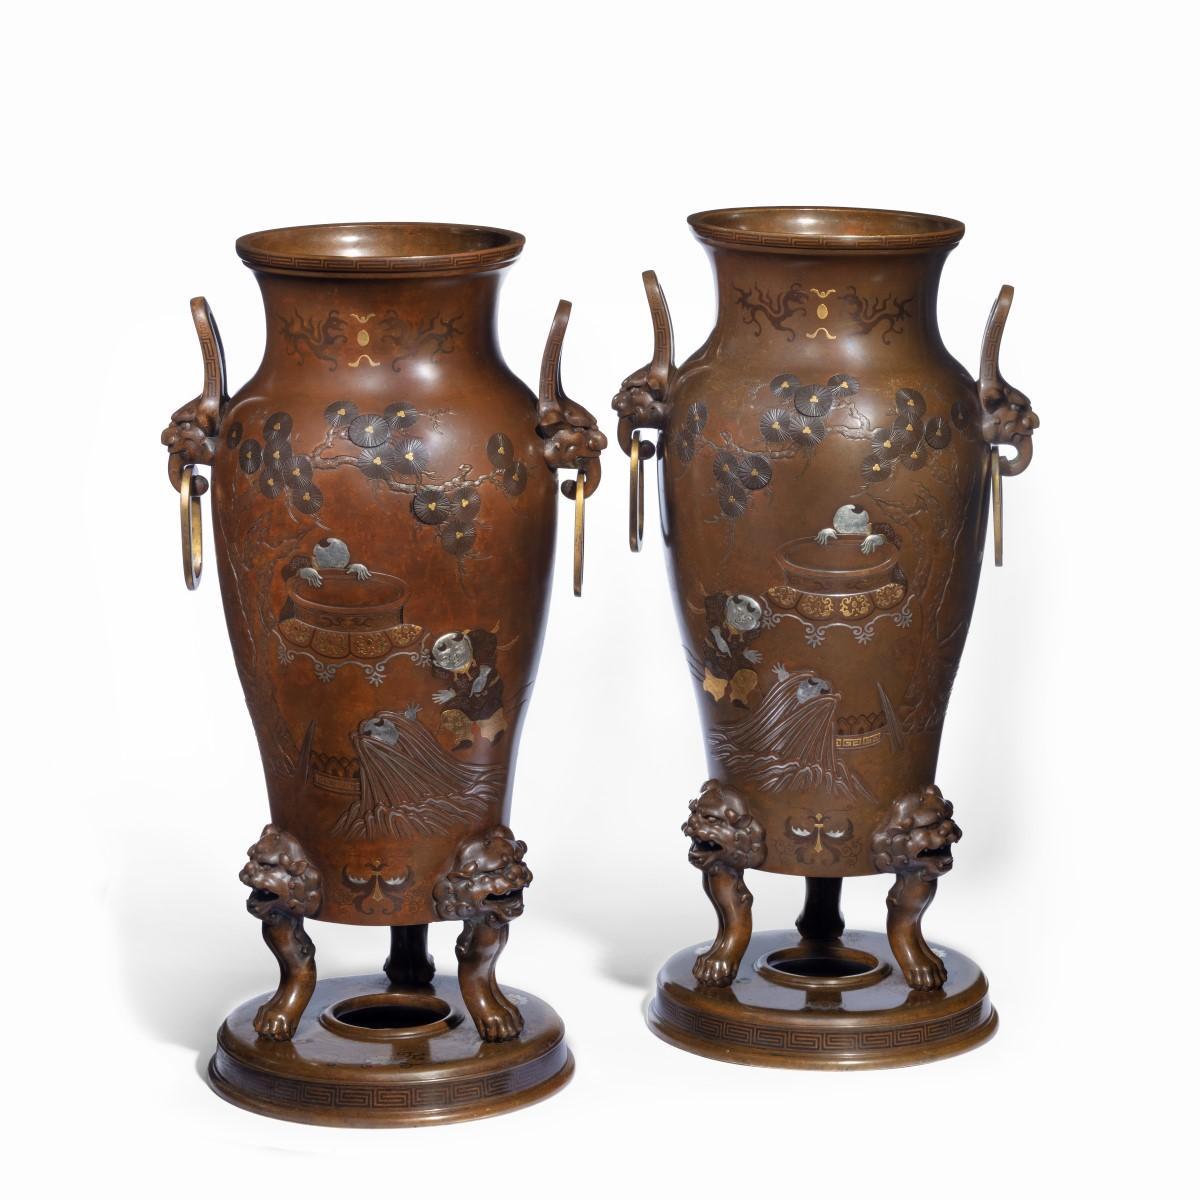 Pair of Large Meiji Period Bronze Vases In Good Condition For Sale In Lymington, Hampshire